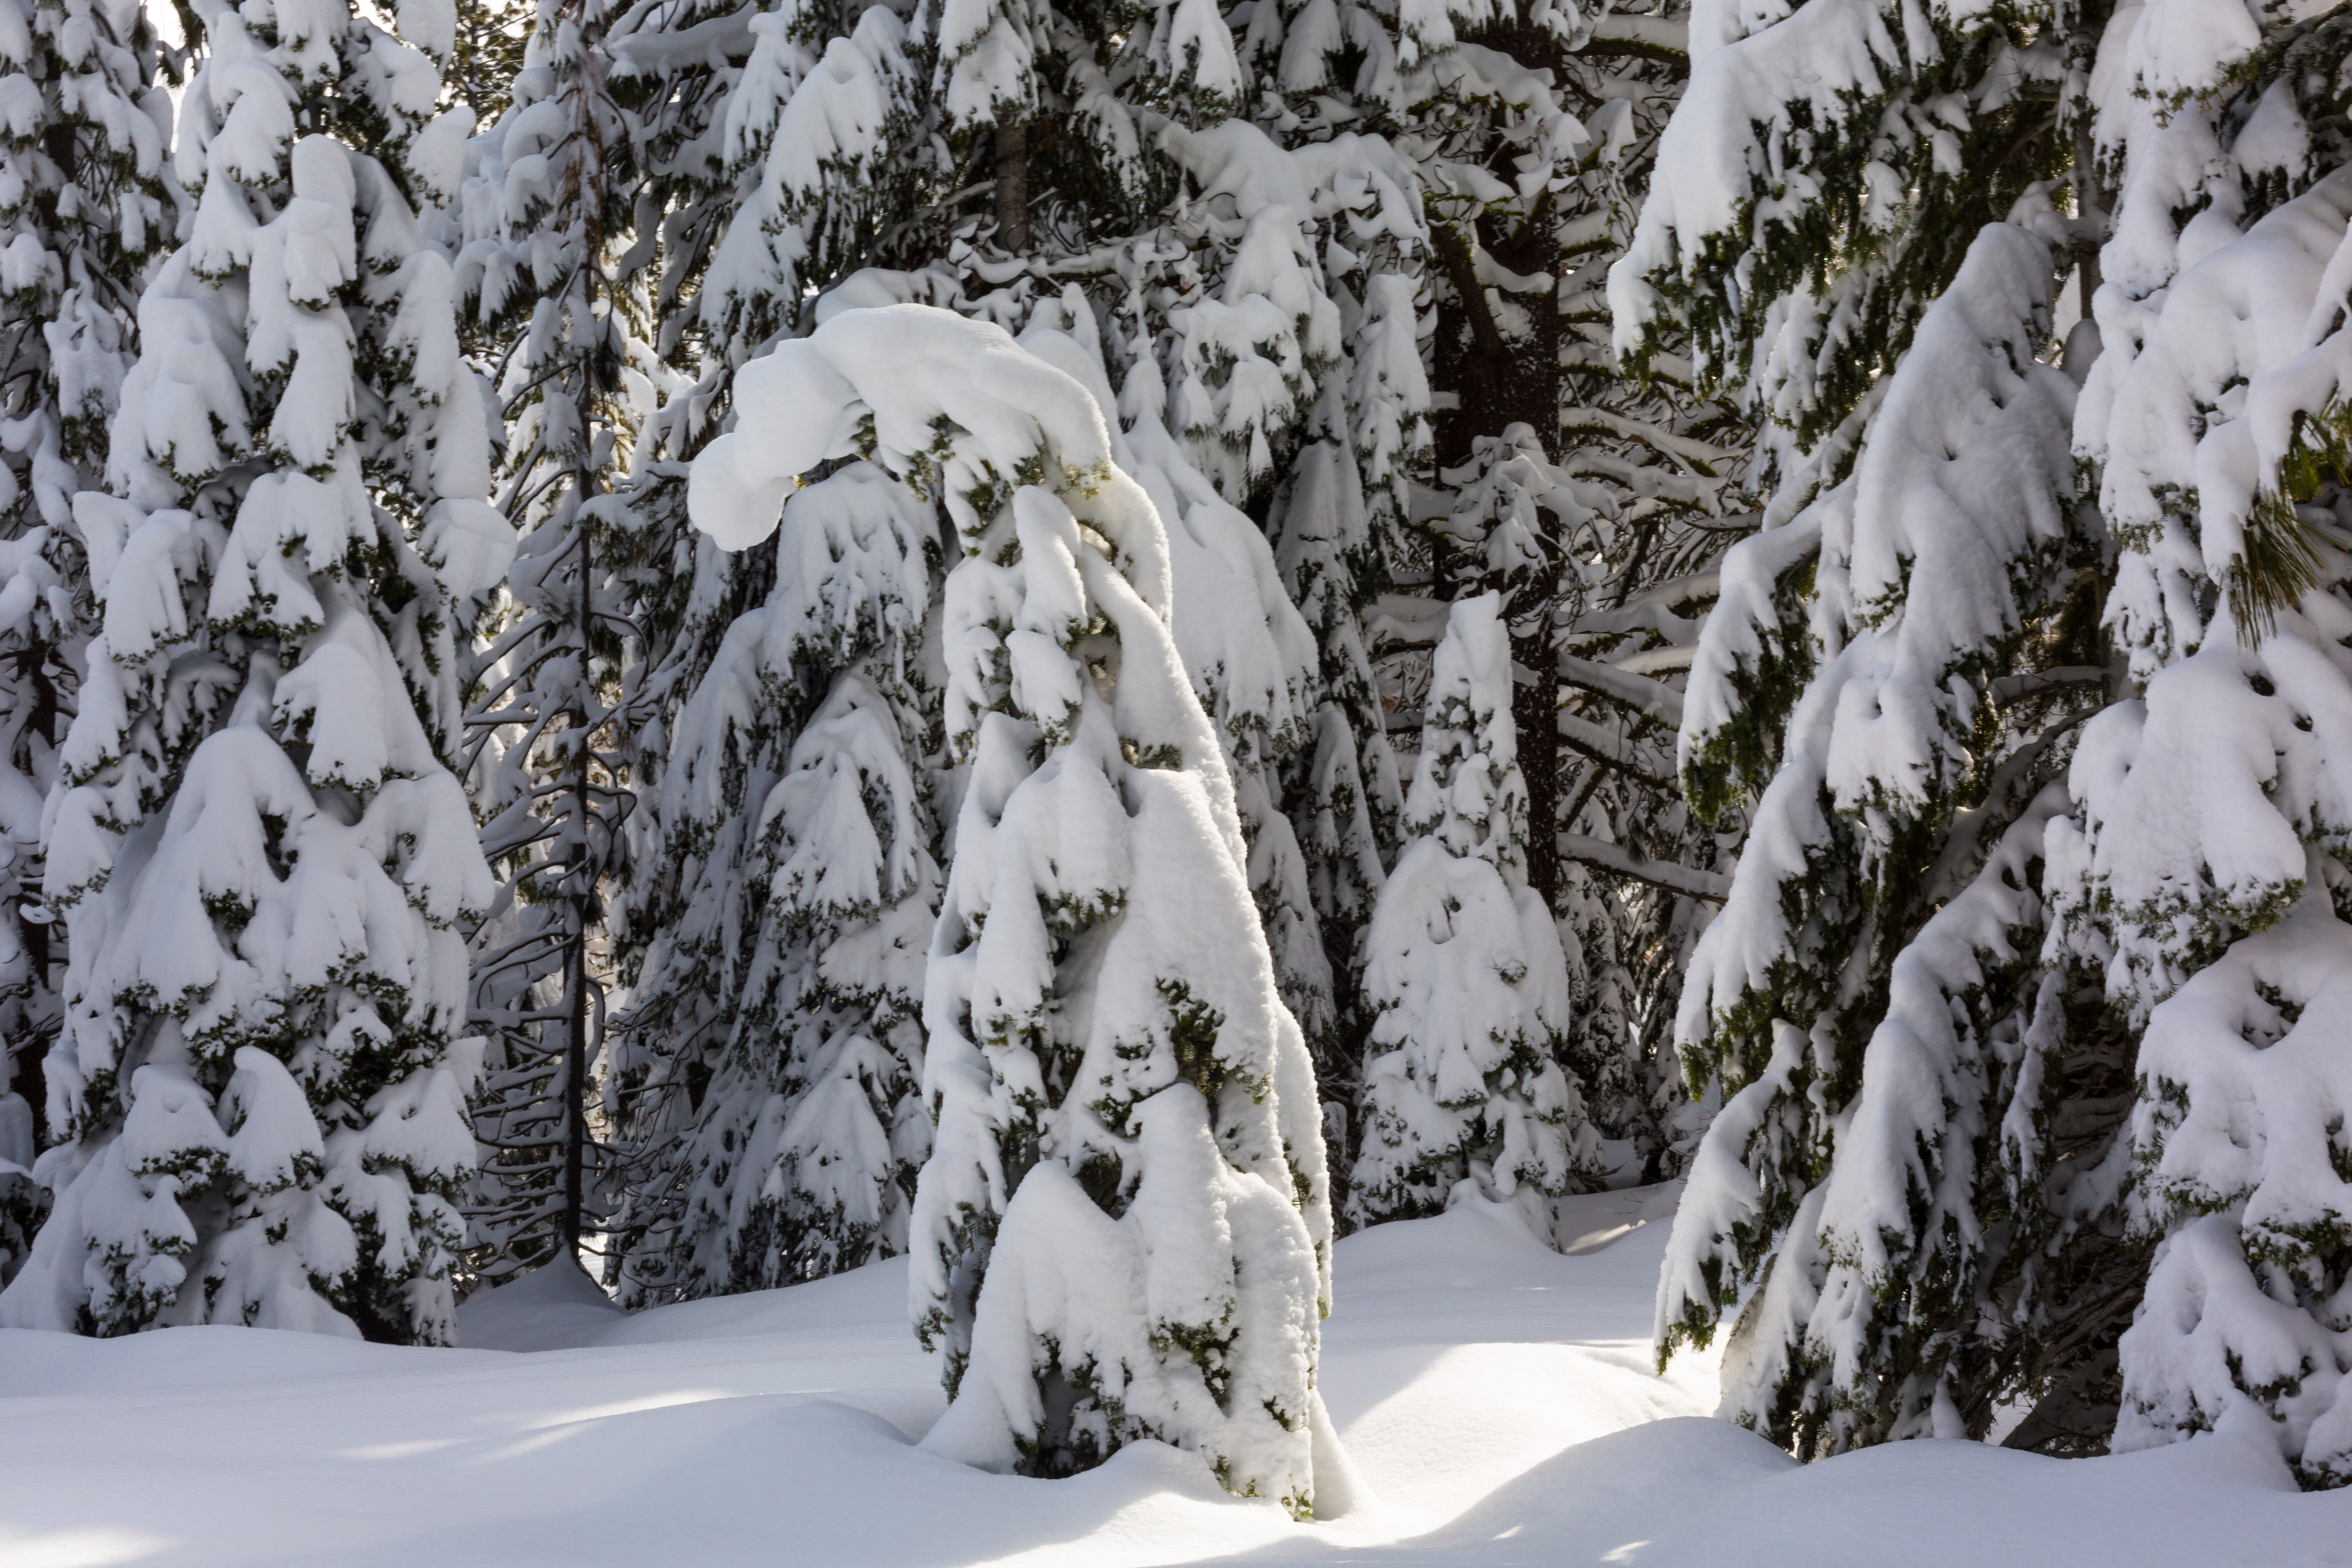 A young pine's top sags under the weight of snow in Lake Tahoe's backcountry.